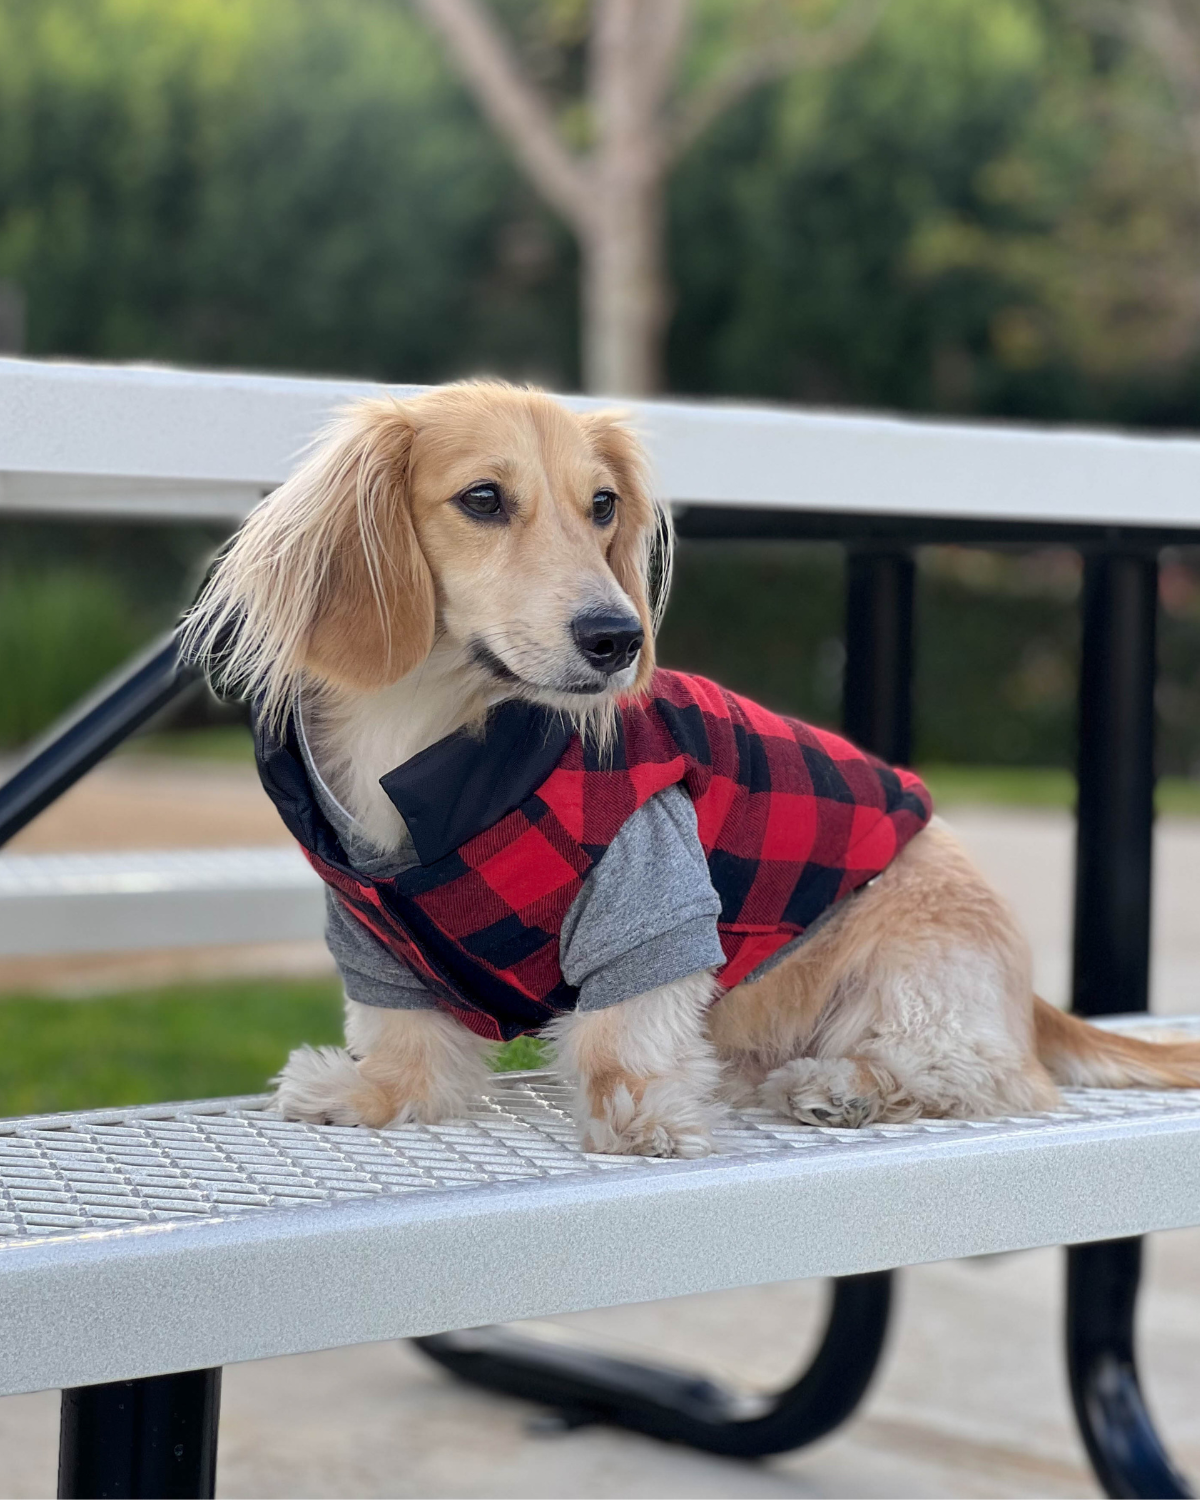 DJANGO's Reversible Puffer Dog Coat features a super cozy interior lining that can be worn facing outwards. Dog and their hoomans love the oversized armholes, adjustable hem, and spacious and easy-access leash portal - djangobrand.com